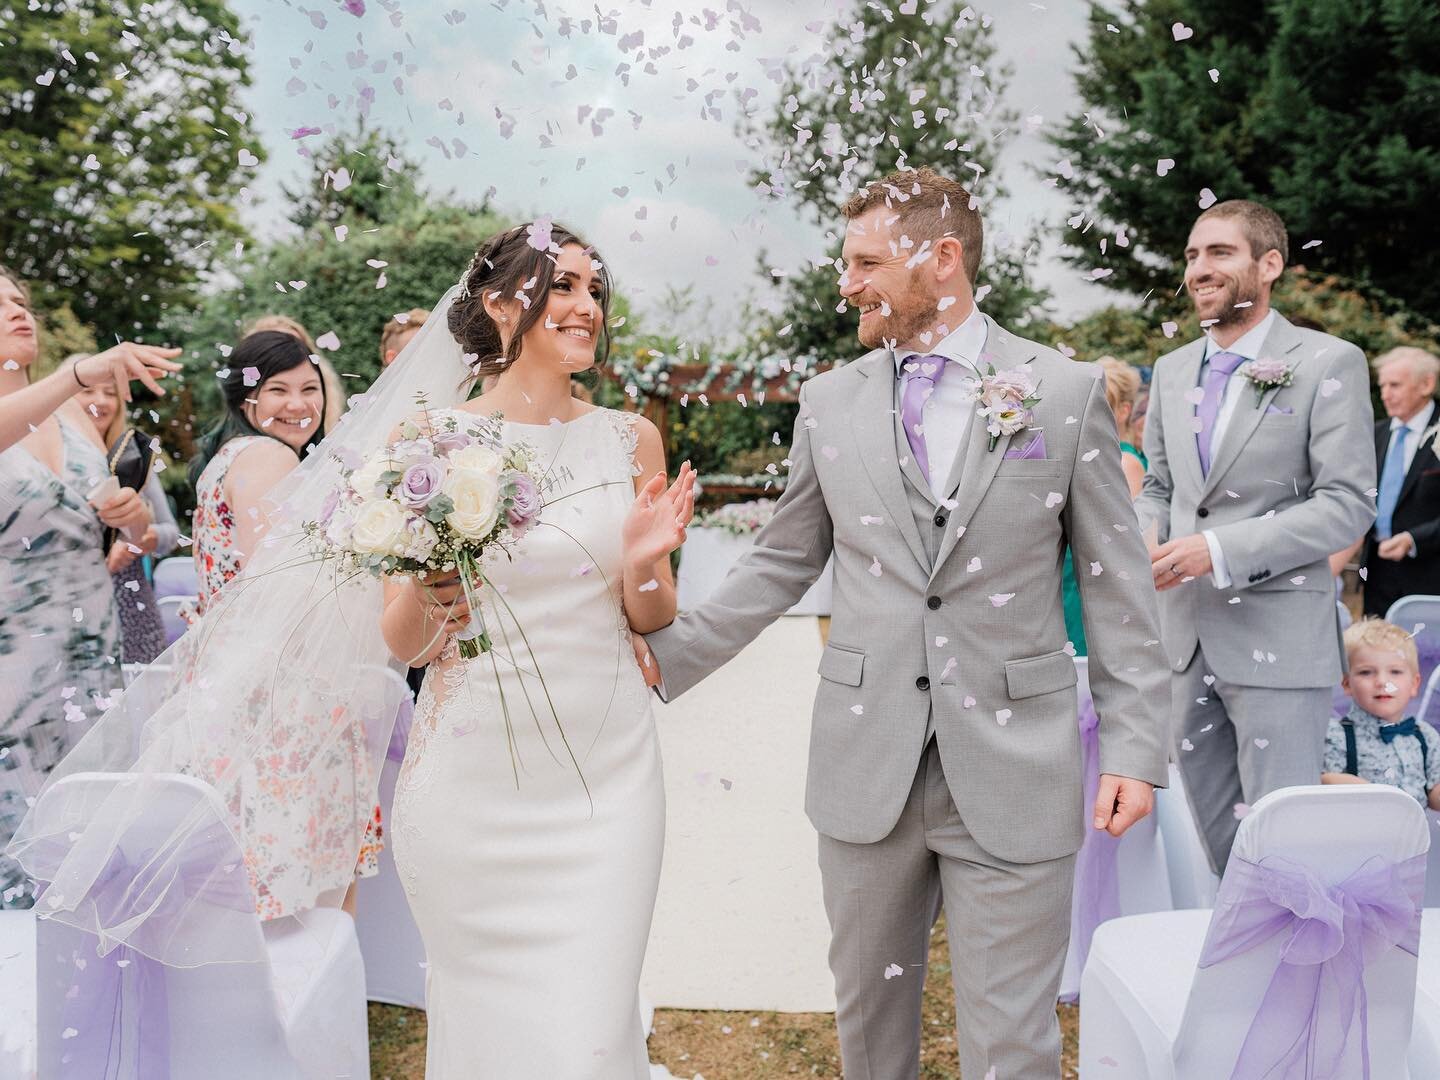 Yaz and Josh totally crushed the confetti shot at their outdoor ceremony at the @abbeysandshotel in Torquay. 💫 It was pure confetti madness, like a freakin' party explosion! 🎉

Big props to Yaz and Josh for bringing the confetti party to a whole ne